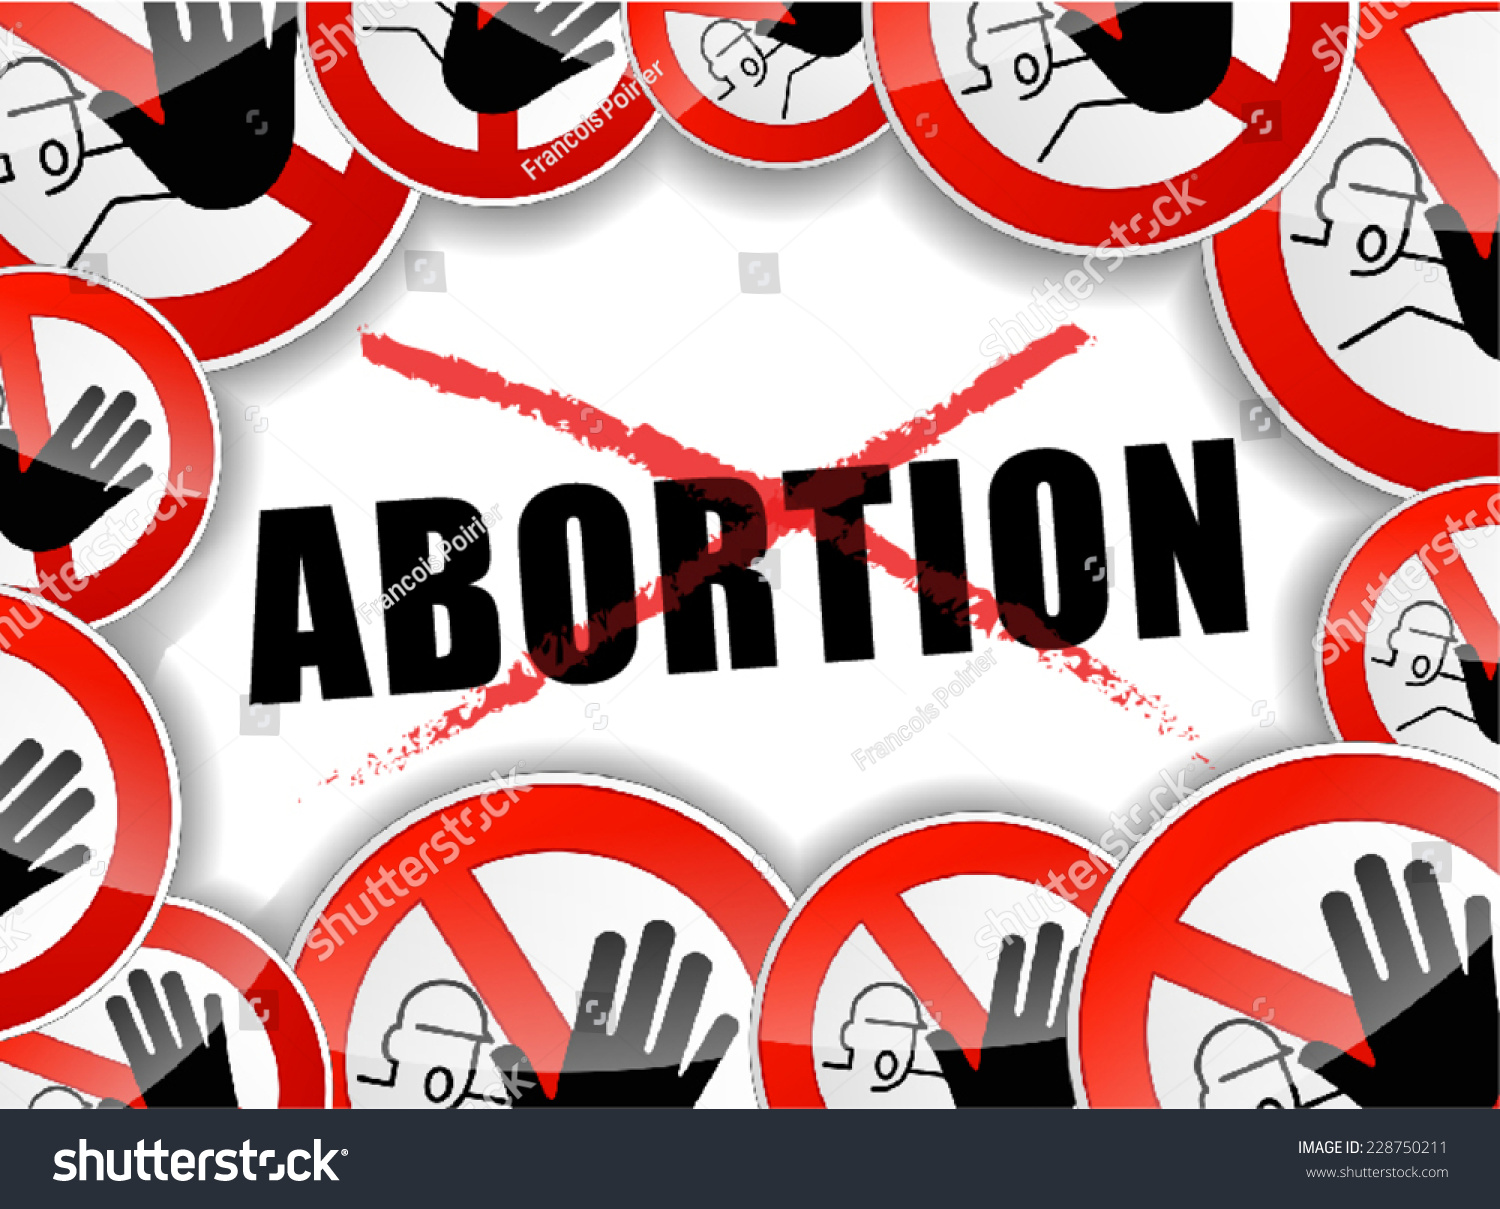 Illustration No Abortion Abstract Concept Background Stock Vector